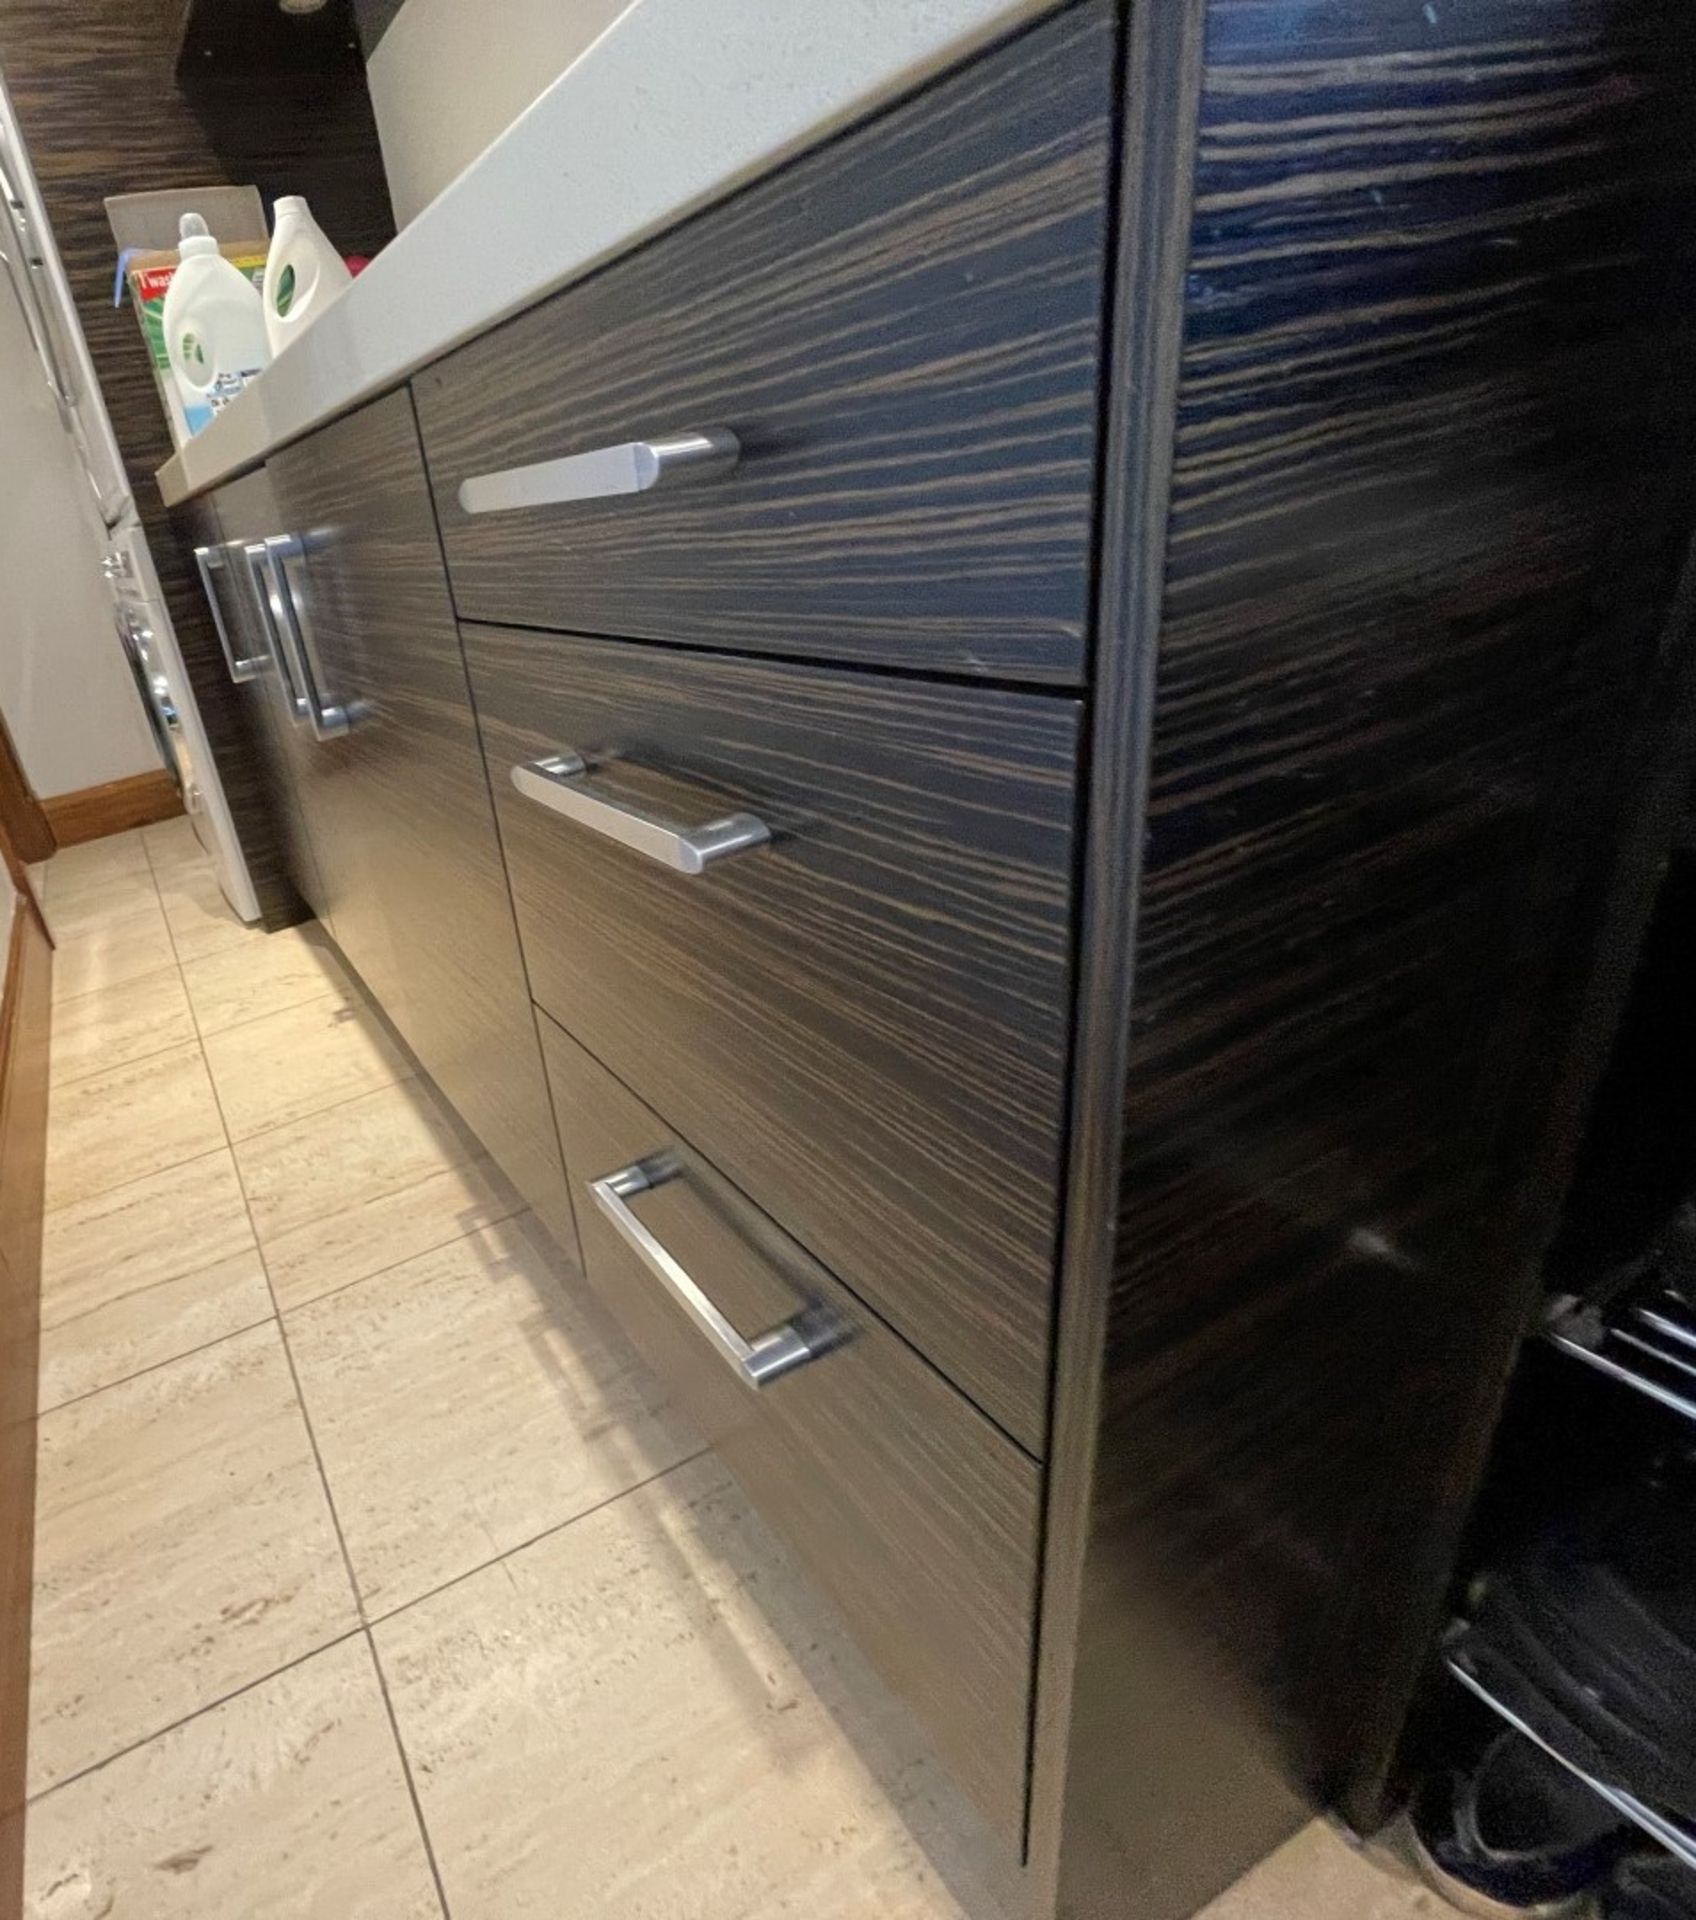 1 x Bespoke Fitted Mowlem & Co Utility Room - Includes Storage Cabinets, Sink And Granite Worktops - - Image 19 of 28